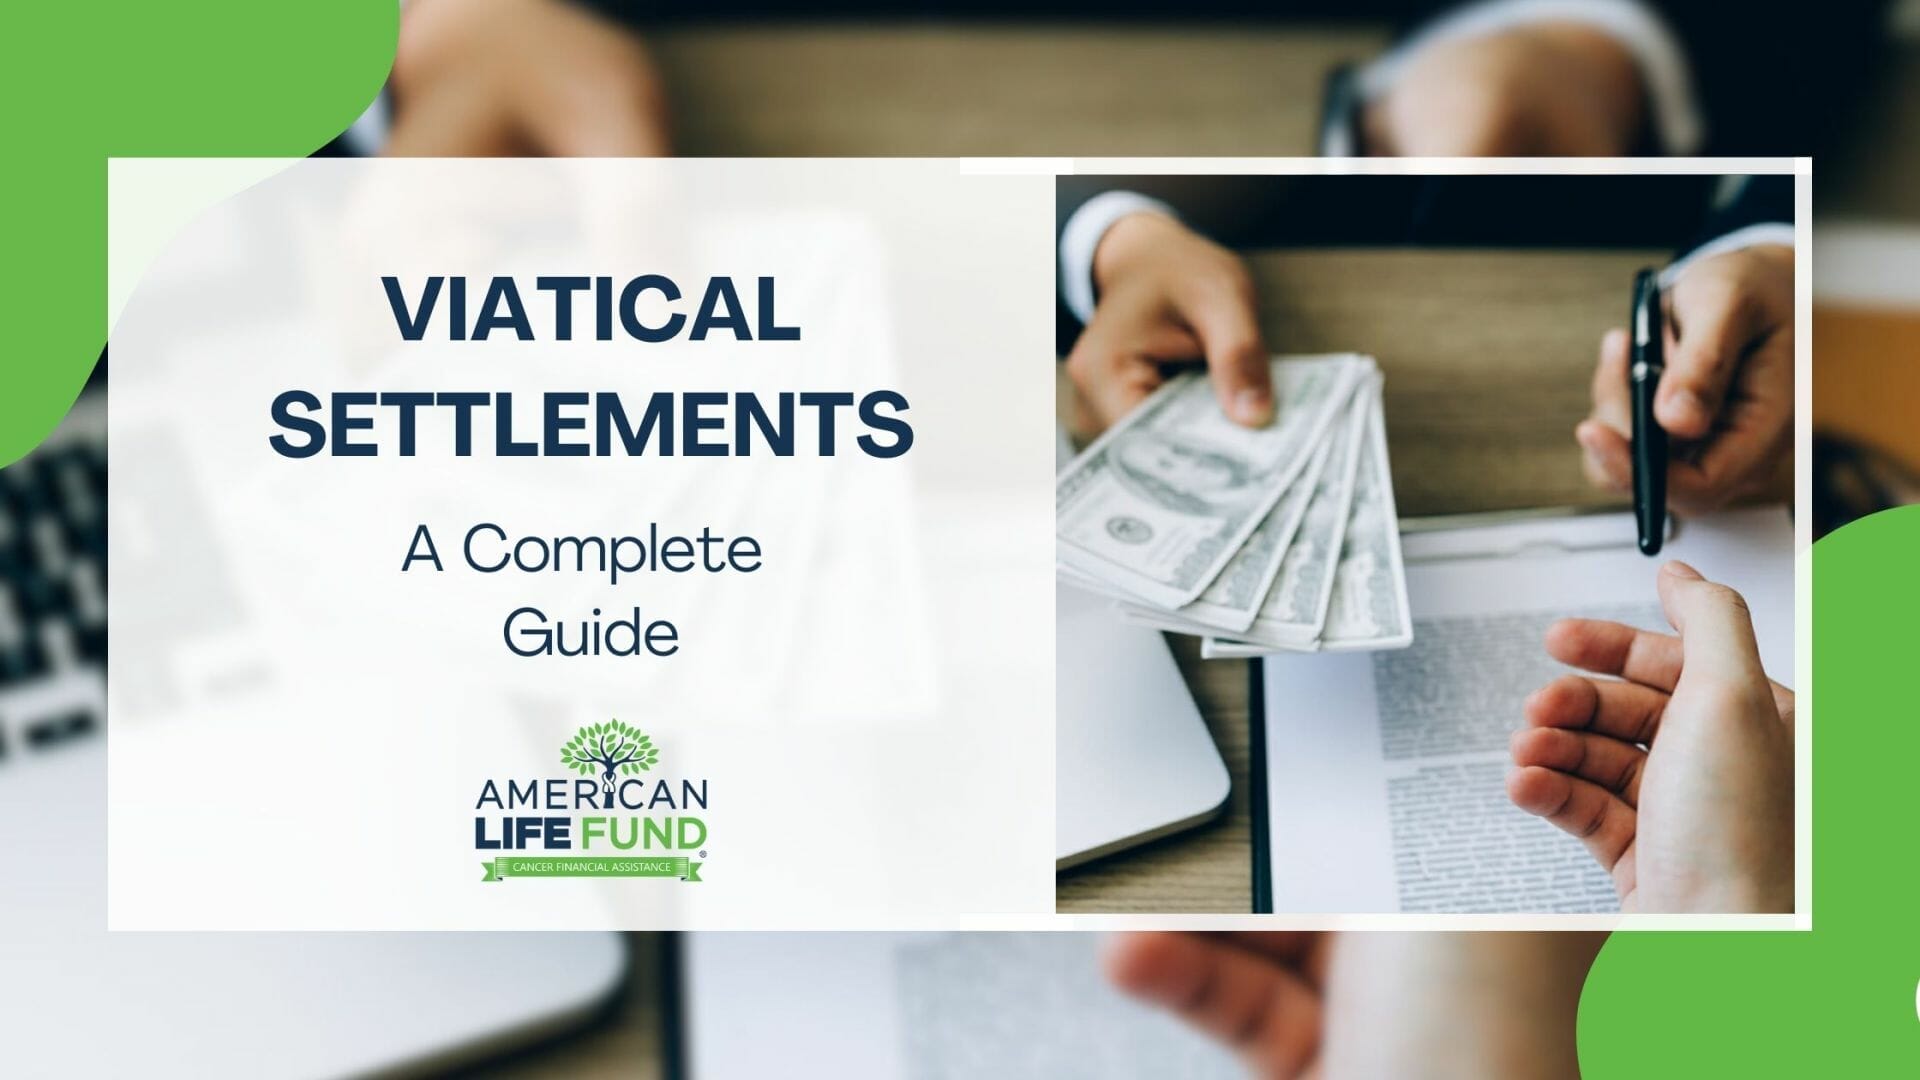 The image is a promotional graphic with the text 'VIATICAL SETTLEMENTS - A Complete Guide' featured prominently in the center. To the left, there is a blurred background of a person using a laptop, and to the right, a closer view of hands exchanging cash and pointing at a document, suggesting a financial transaction or agreement. The logo of American Life Fund is placed at the bottom of the guide, indicating that this visual is likely related to educational content about viatical settlements provided by the company.





